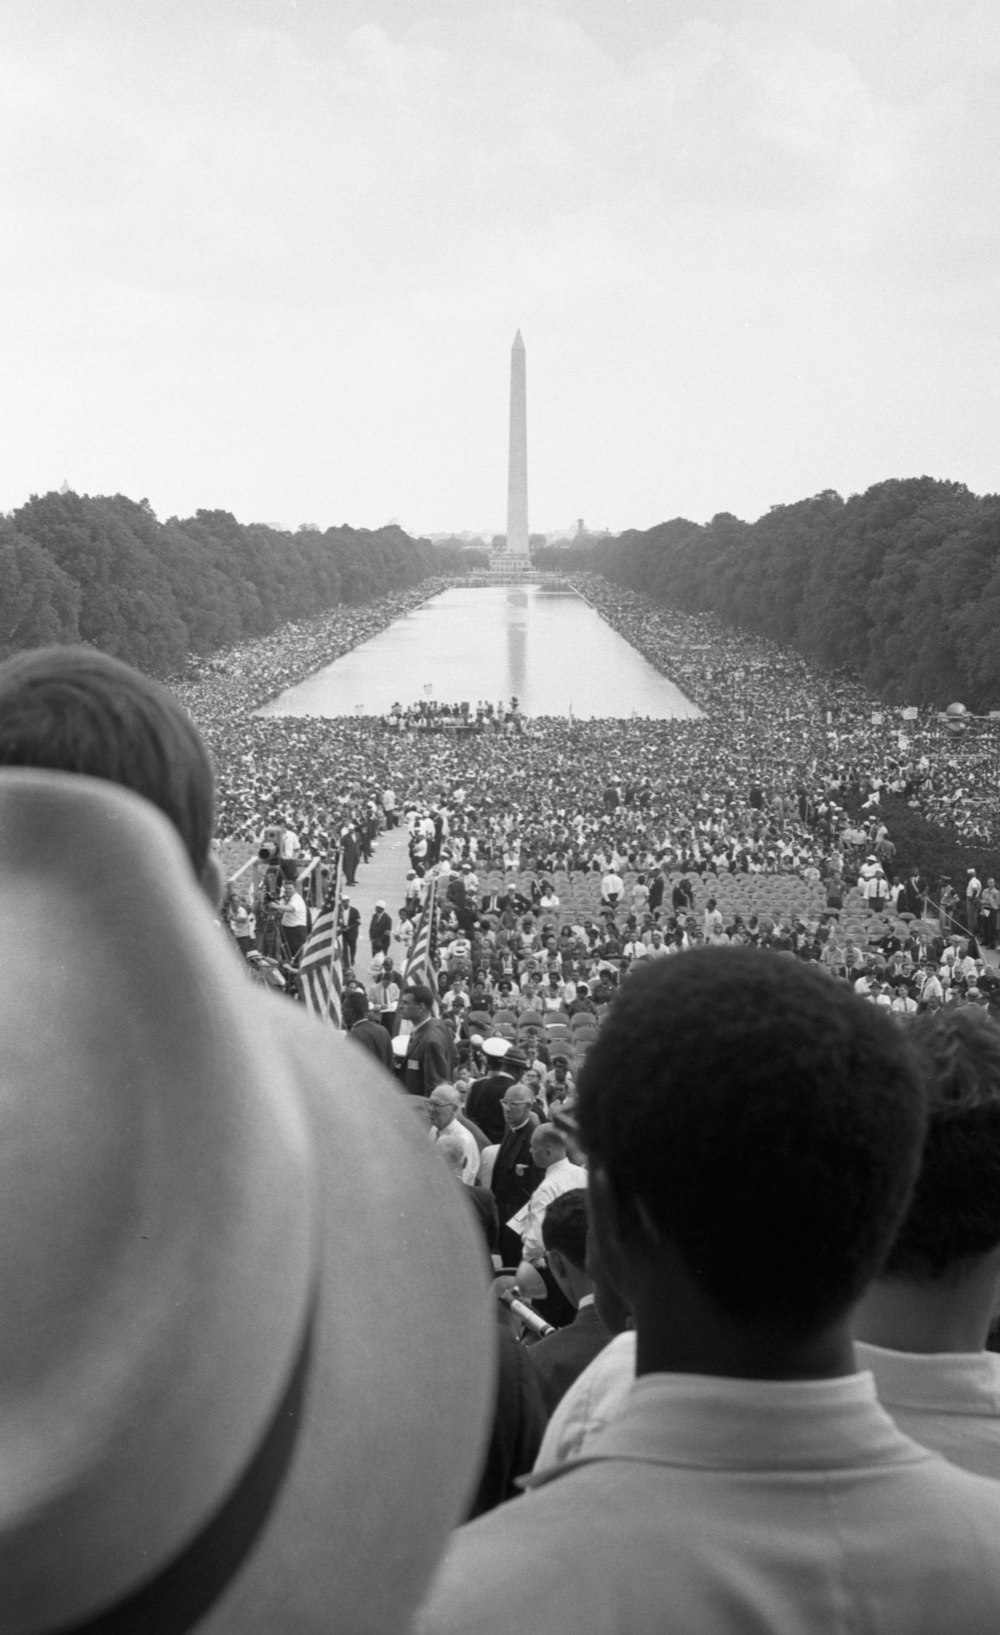 A crowd of African Americans and whites surrounding the Reflecting Pool and continuing to the Washington Monument.